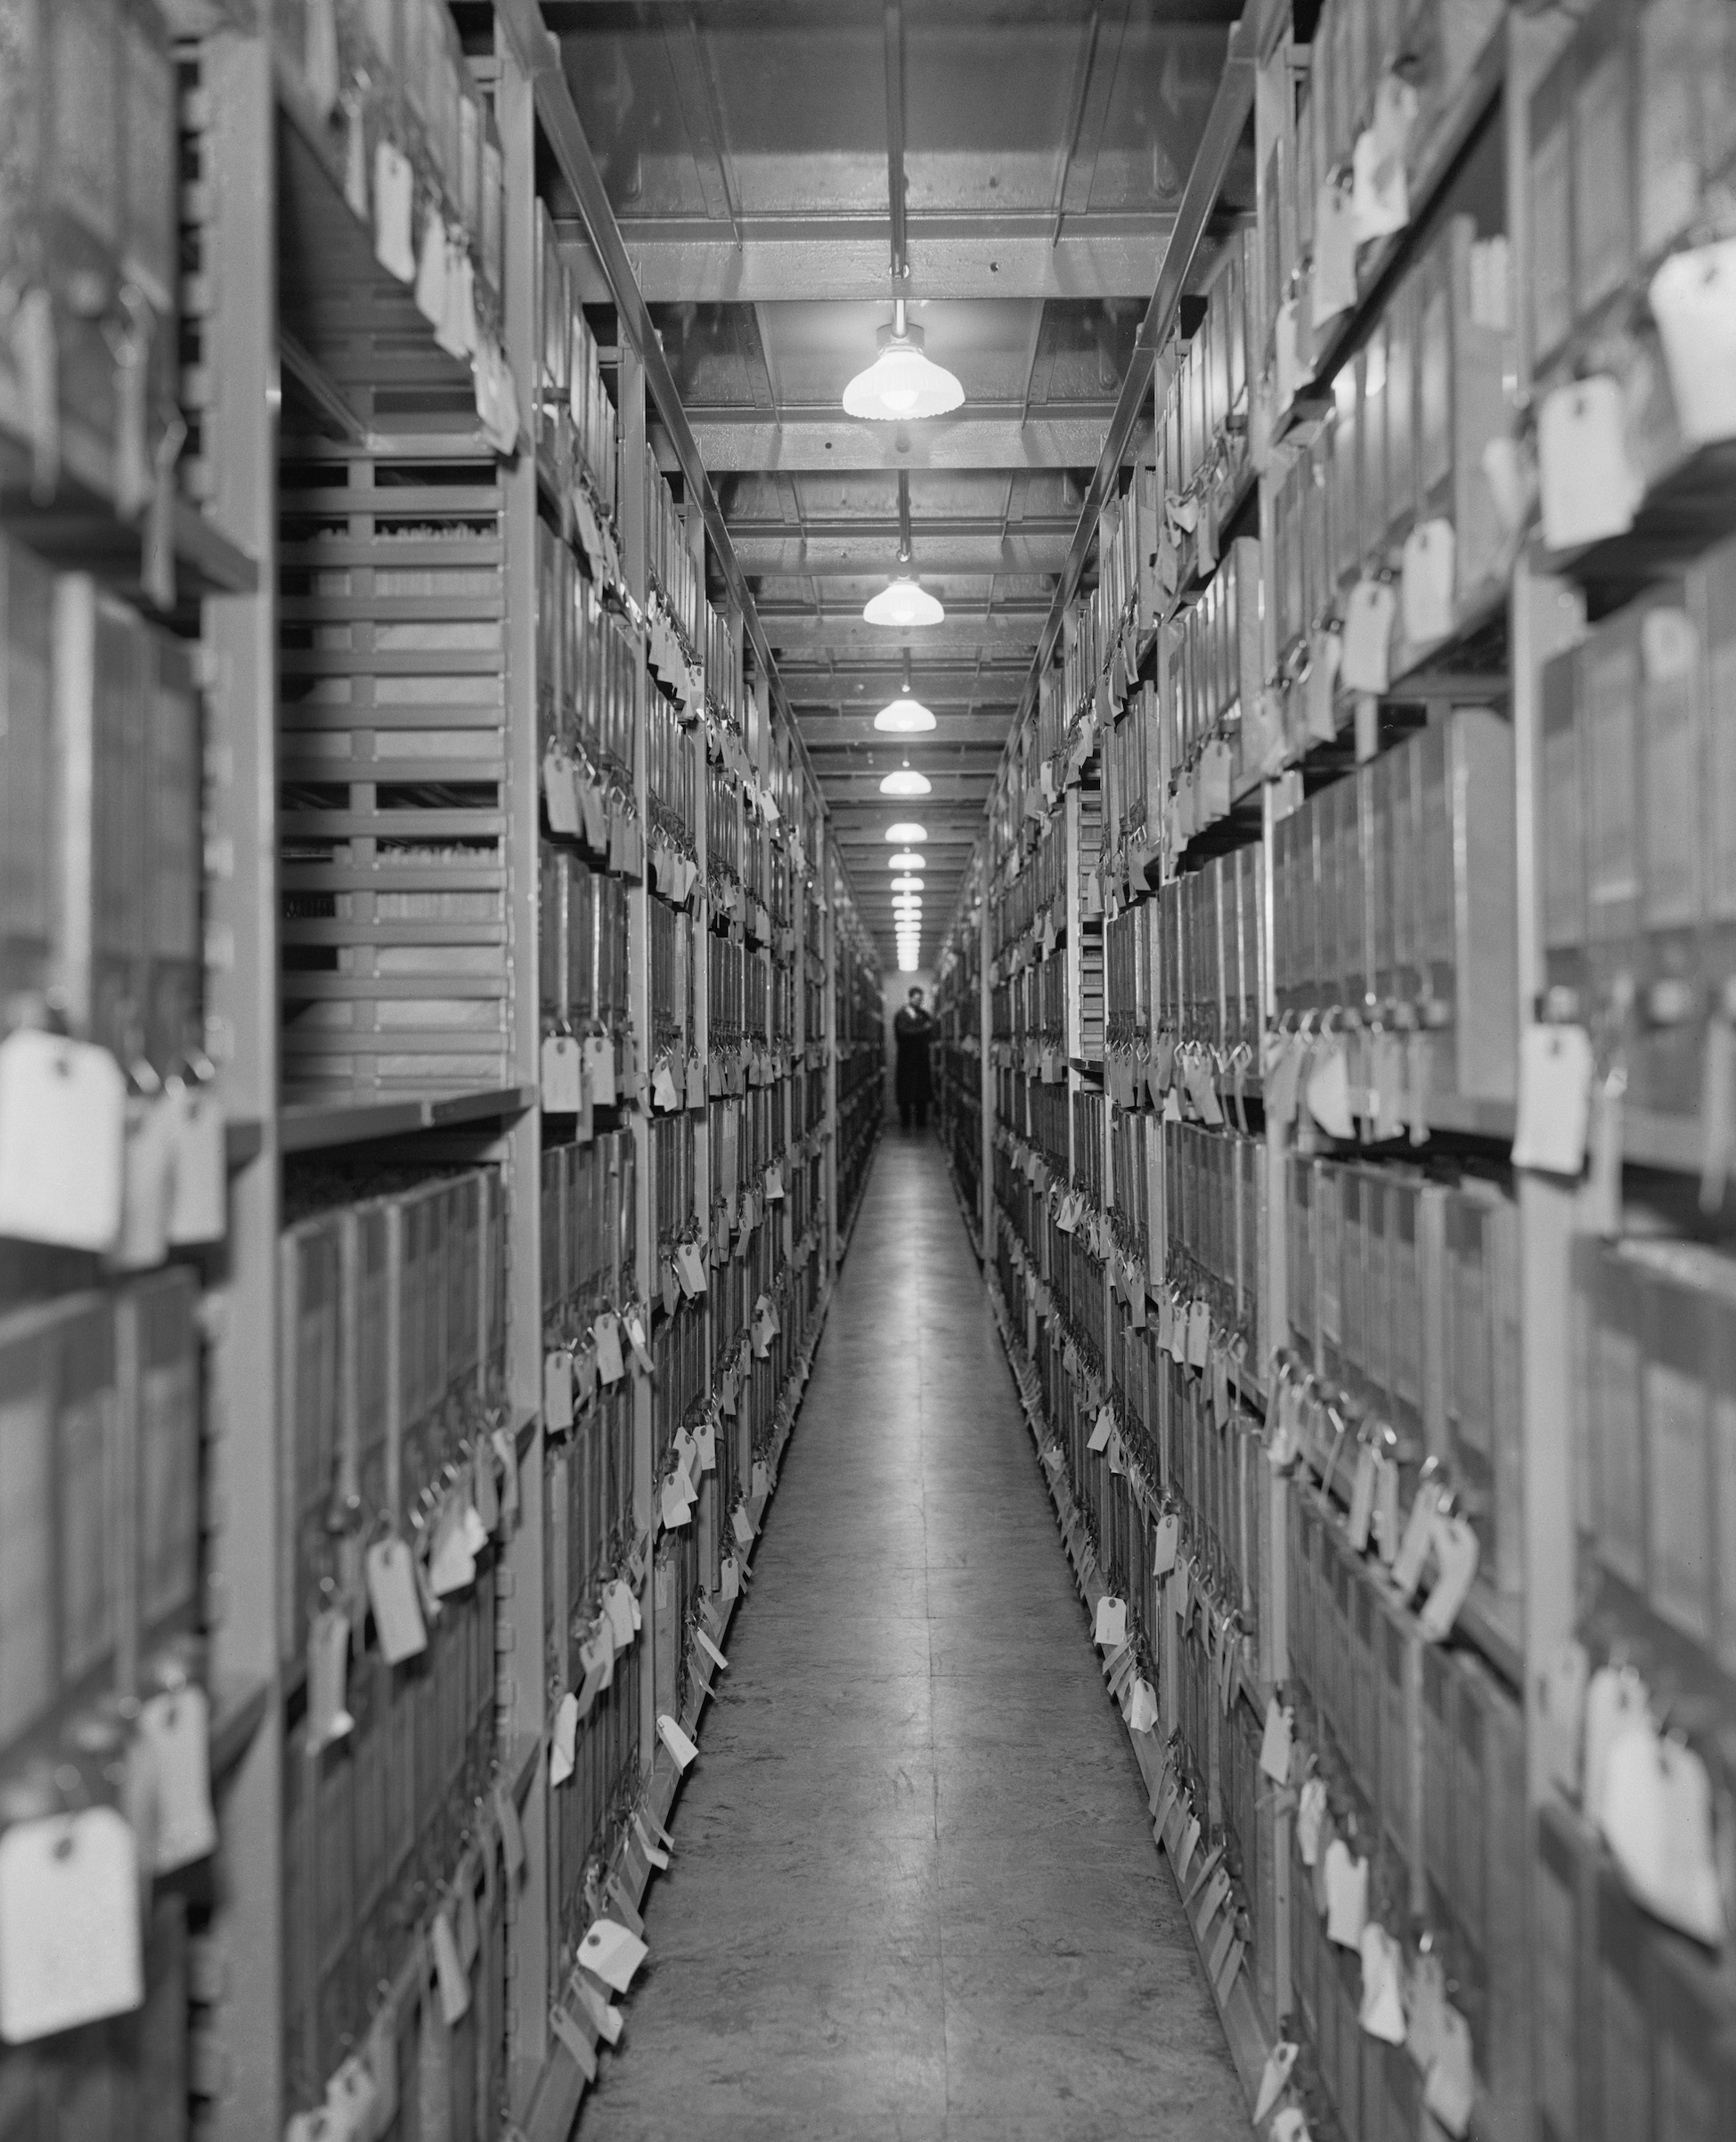 Aisle of Files, Division of War Department, National Archives, Washington DC, USA, Harris &amp; Ewing, 1939